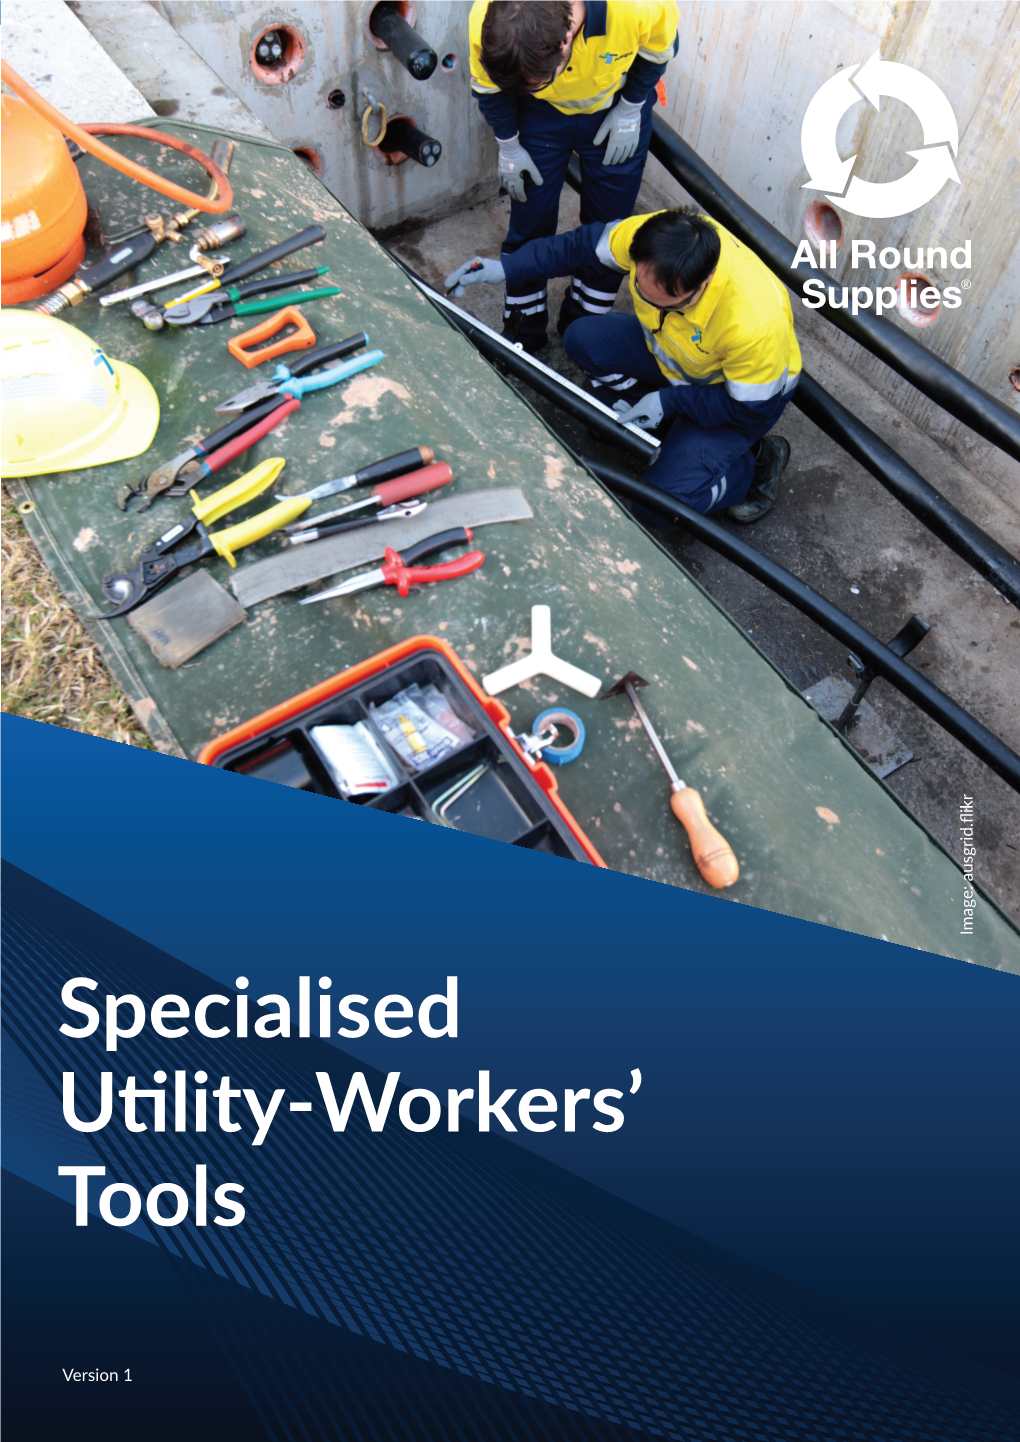 Specialised Utility-Workers' Tools